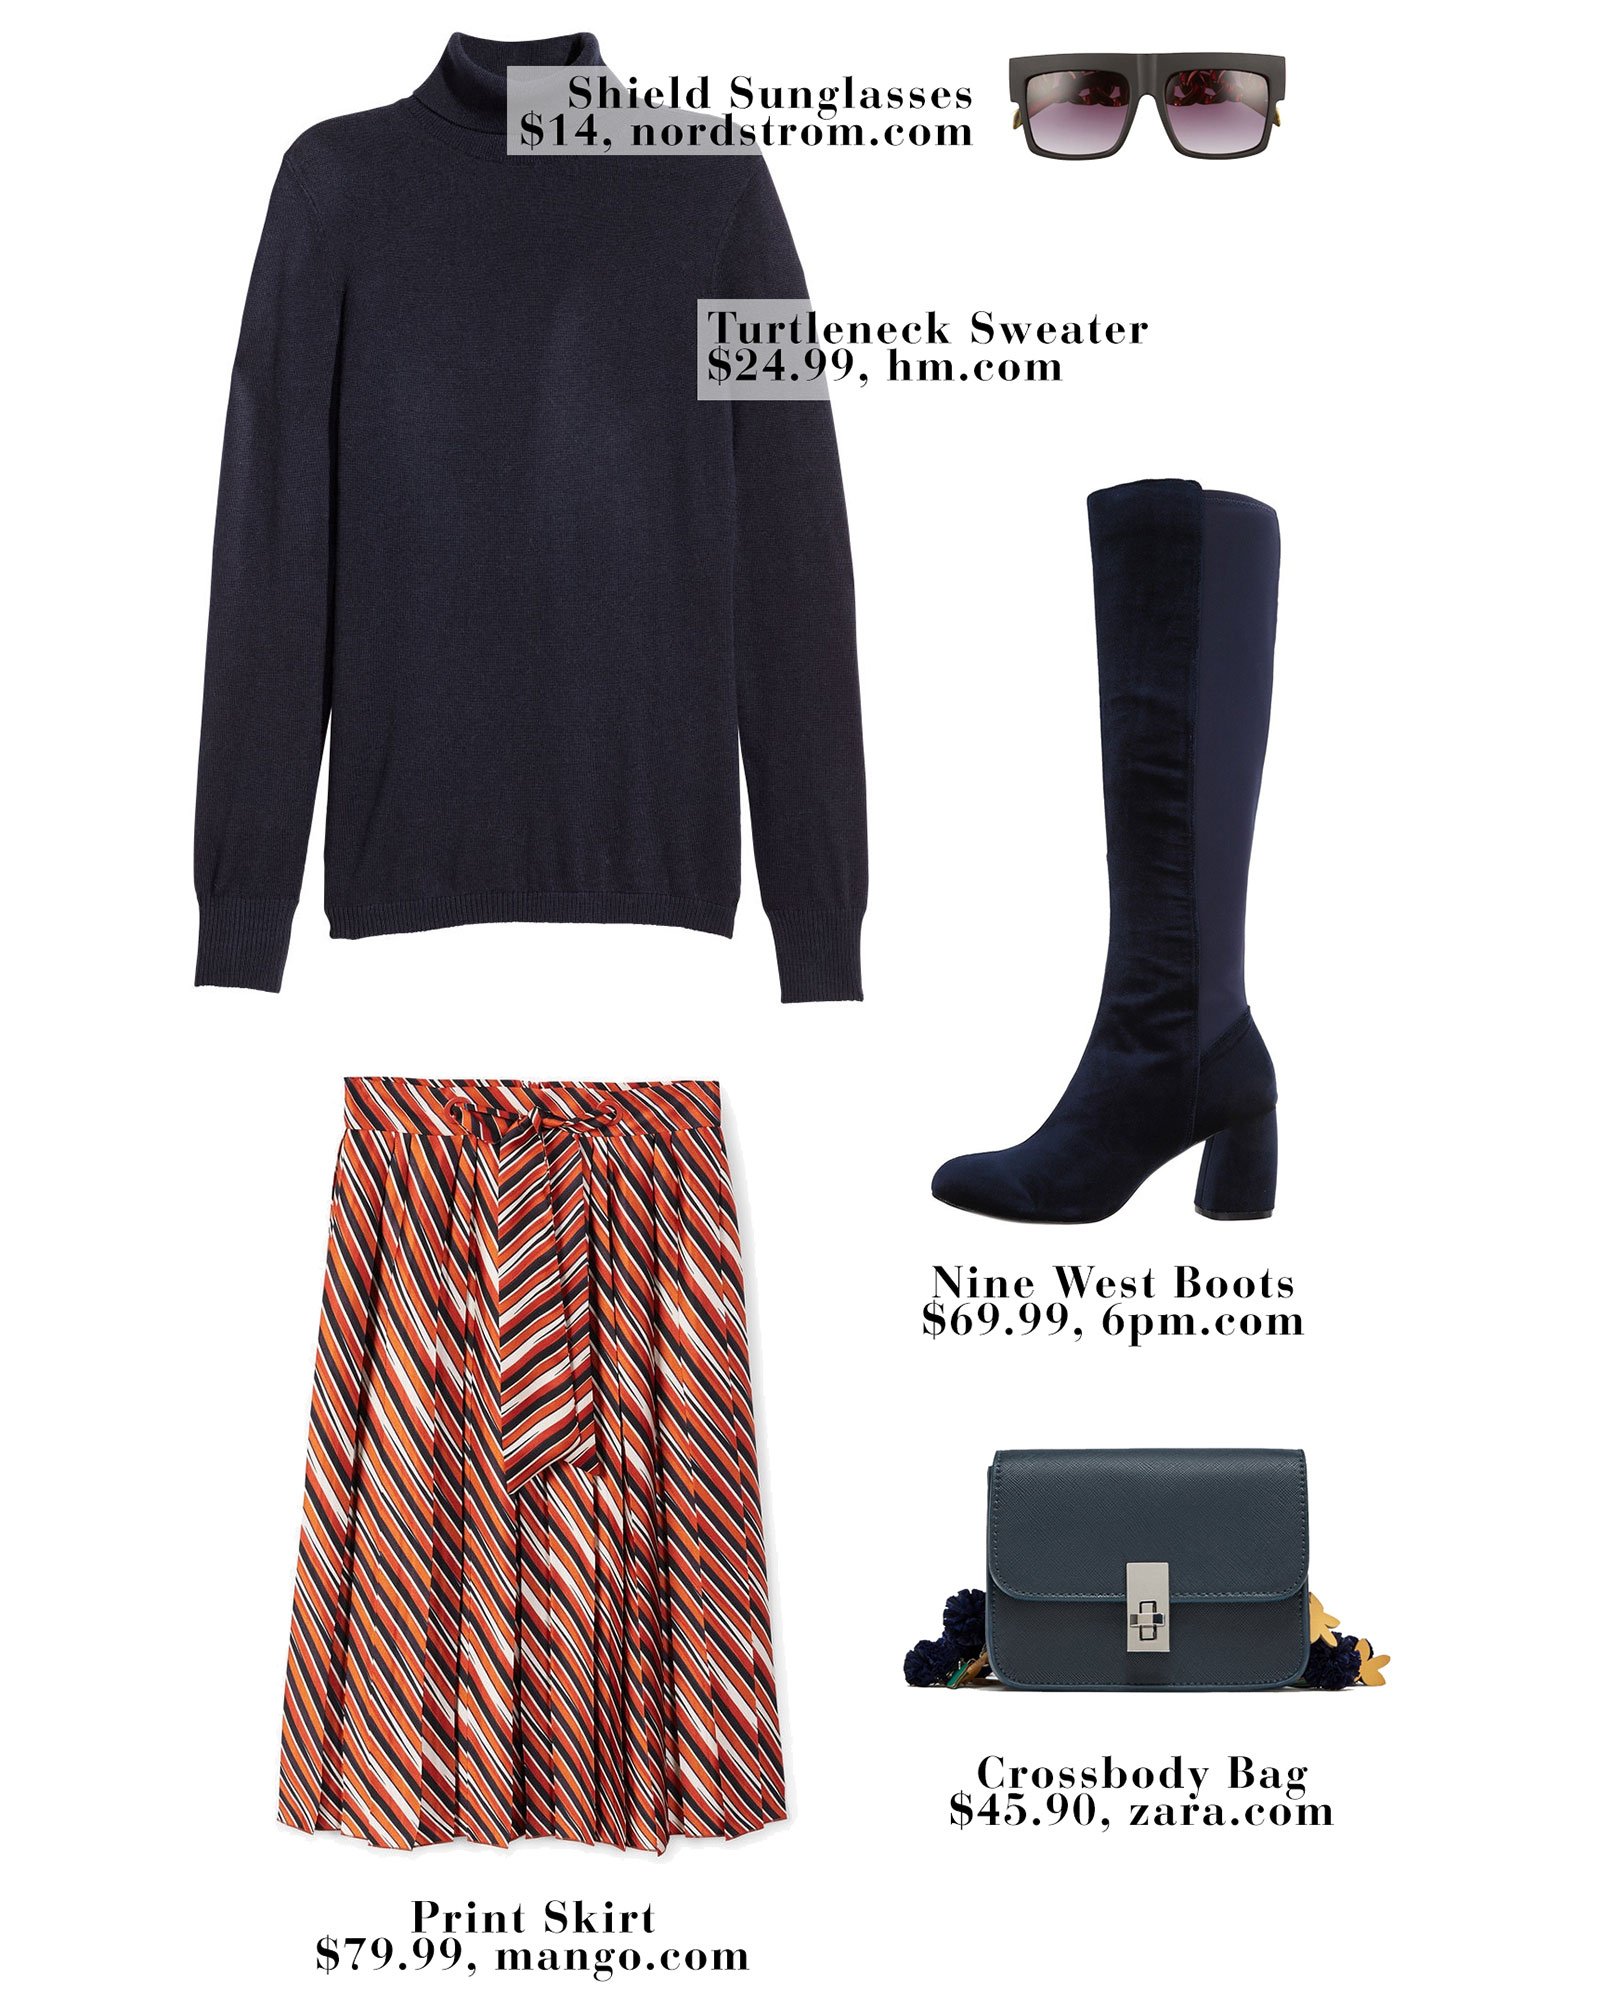 Victoria Beckham's print midi skirt and navy turtleneck look for less